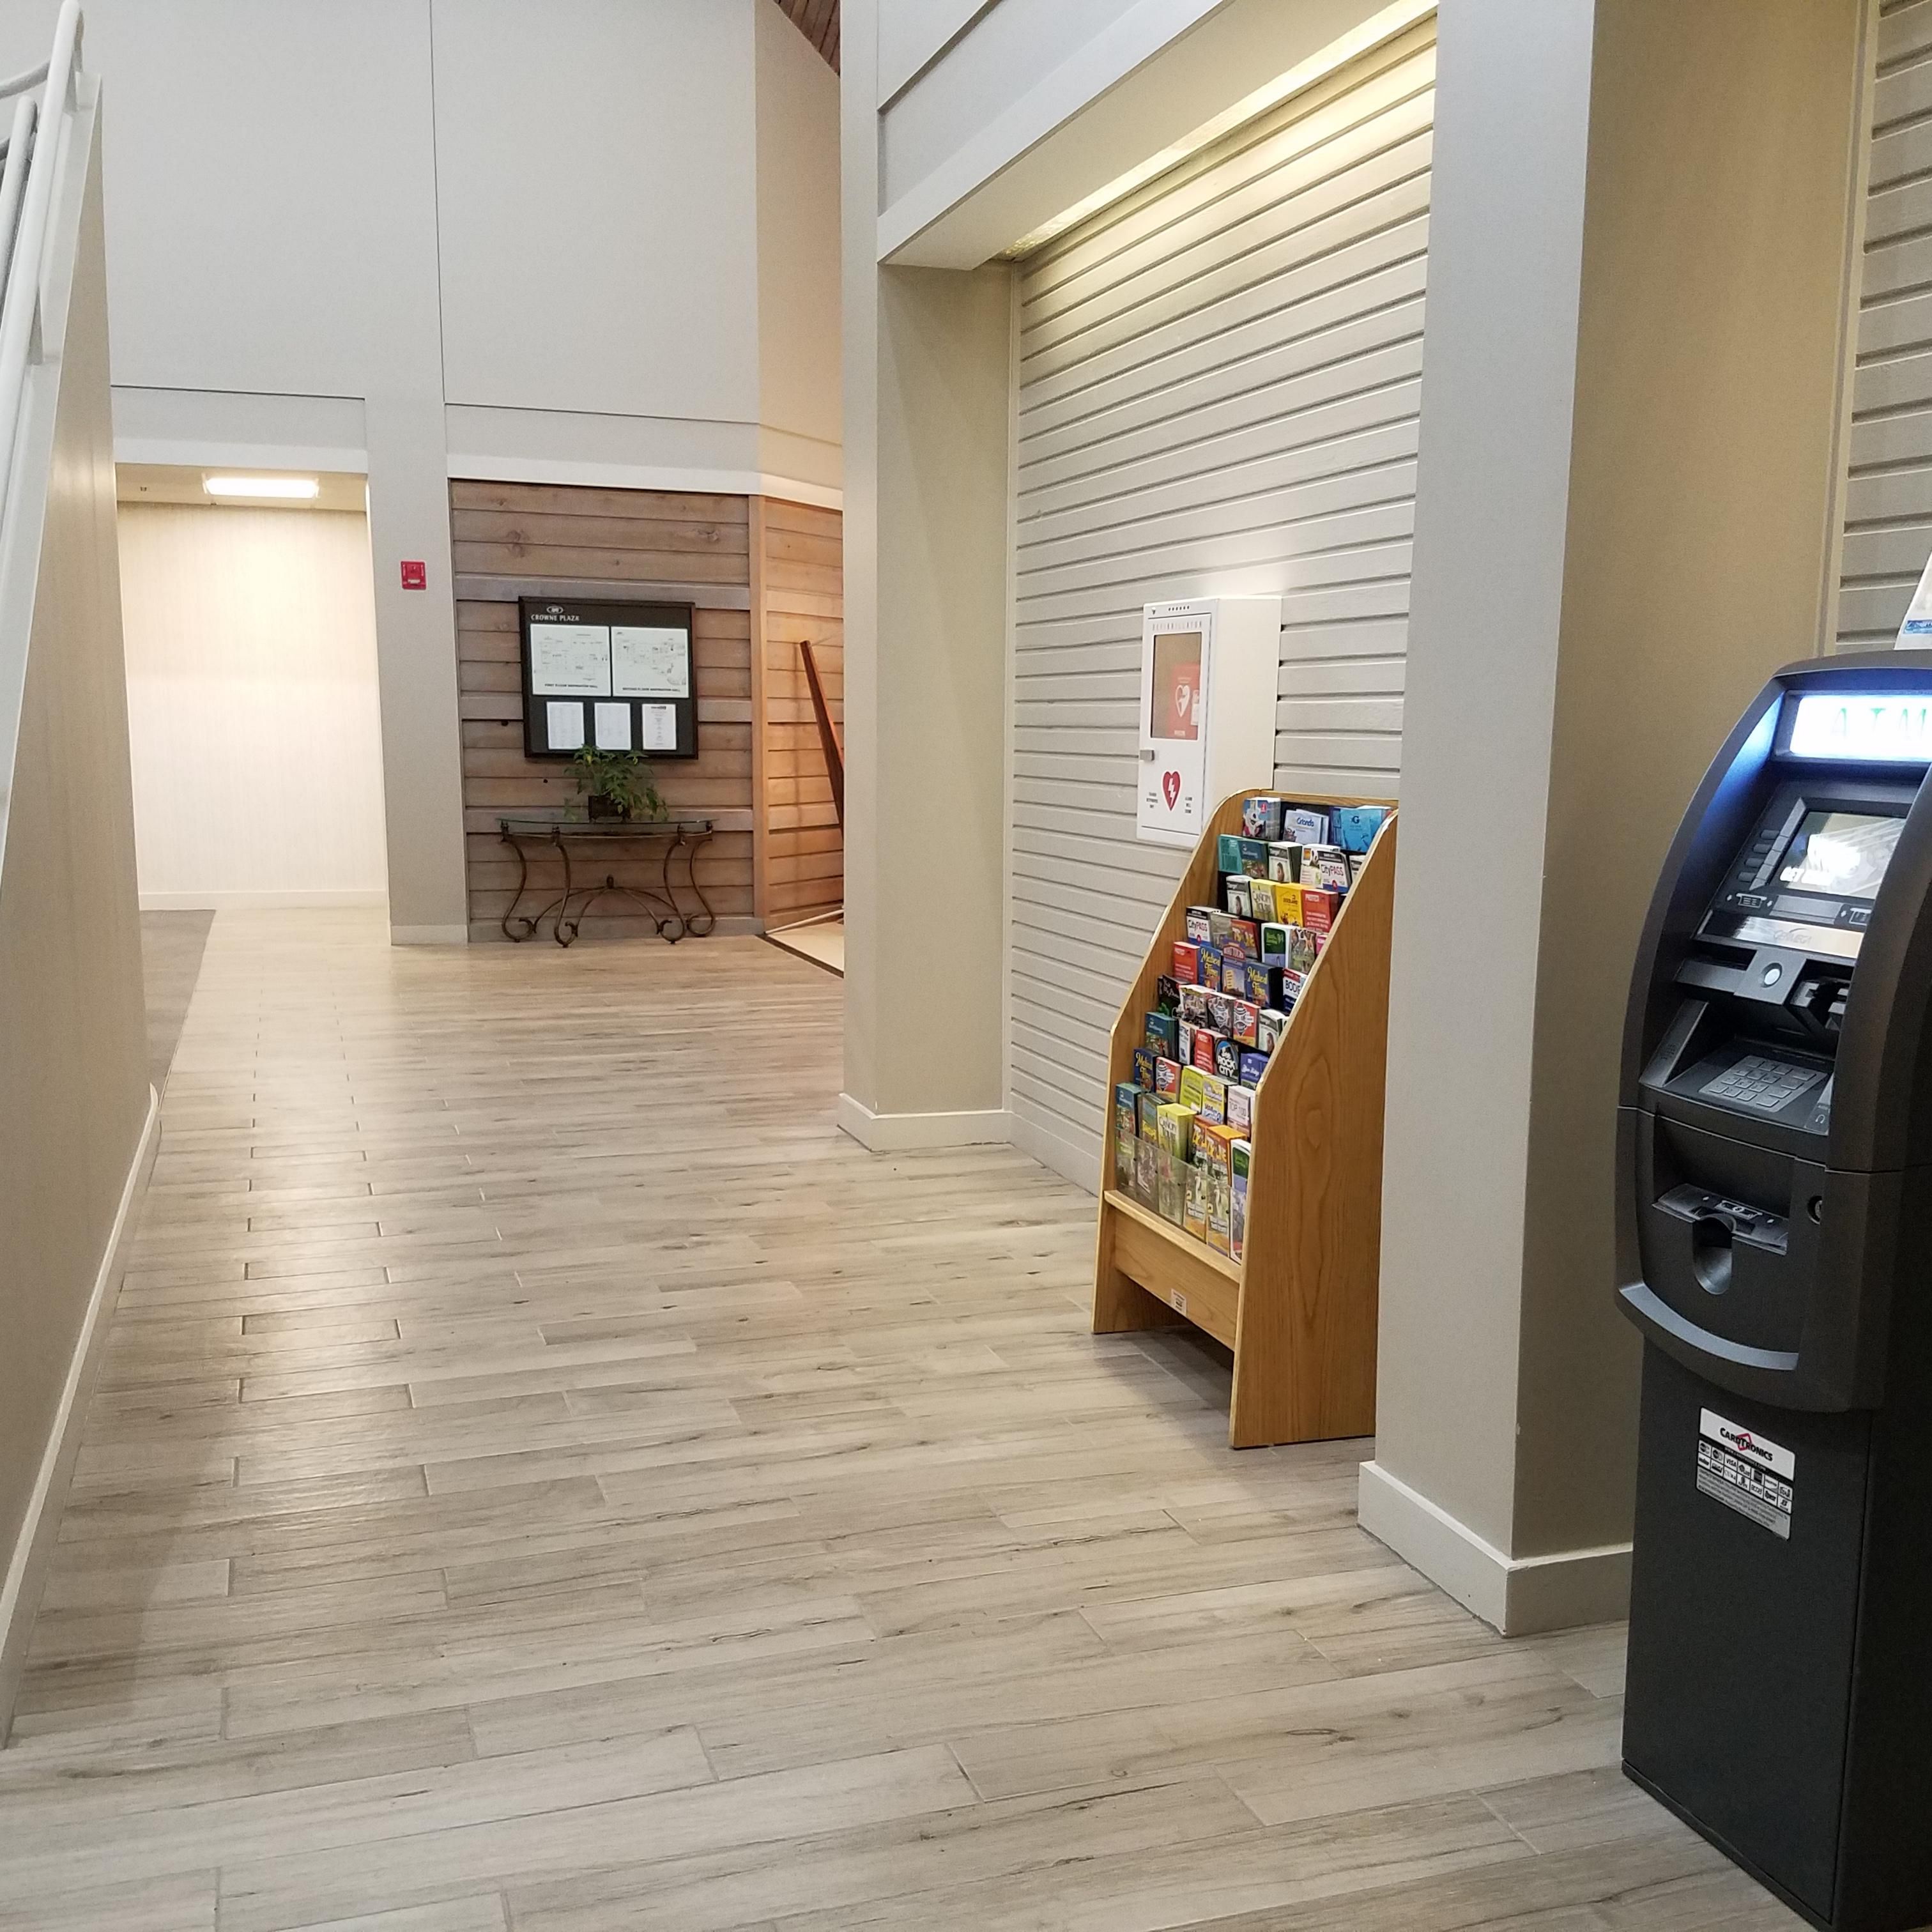 For your convenience, we have an ATM near the Front Lobby